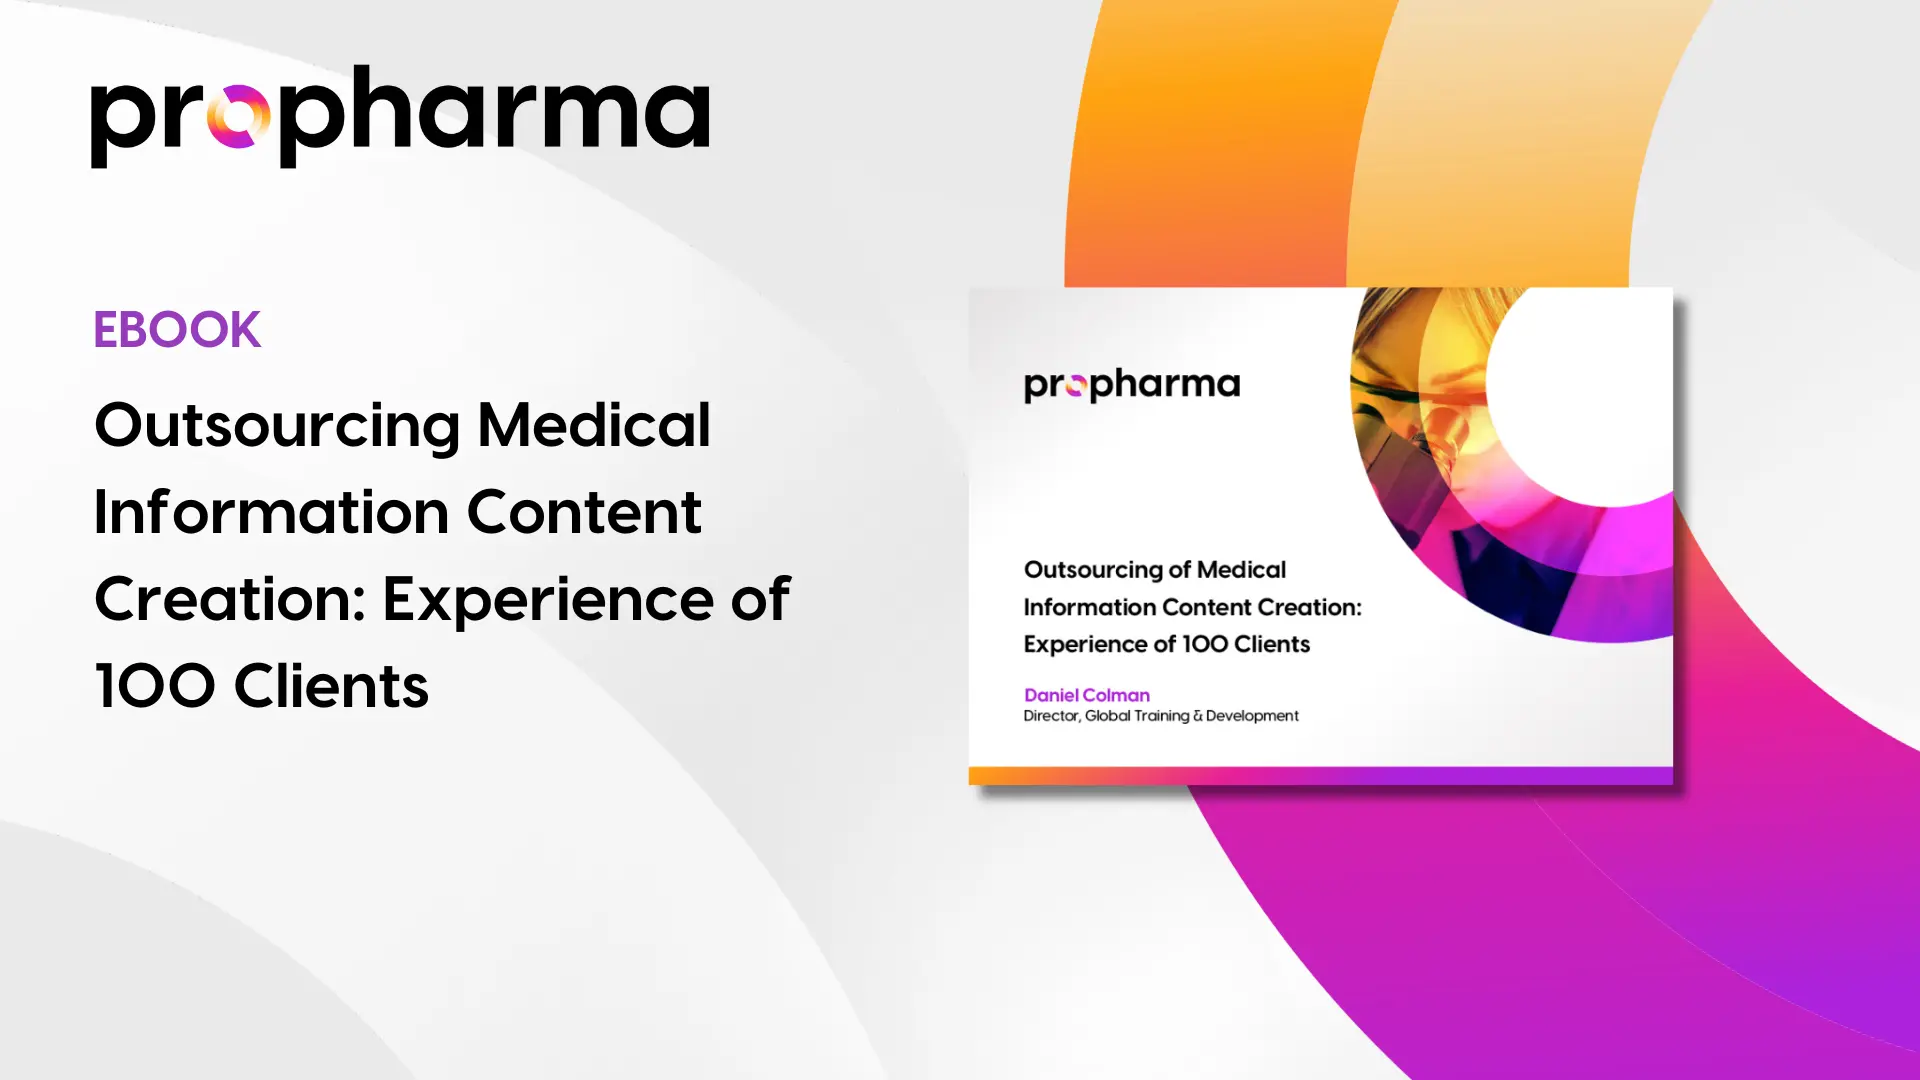 Outsourcing of Medical Information Content Creation: Experience of 100 Clients